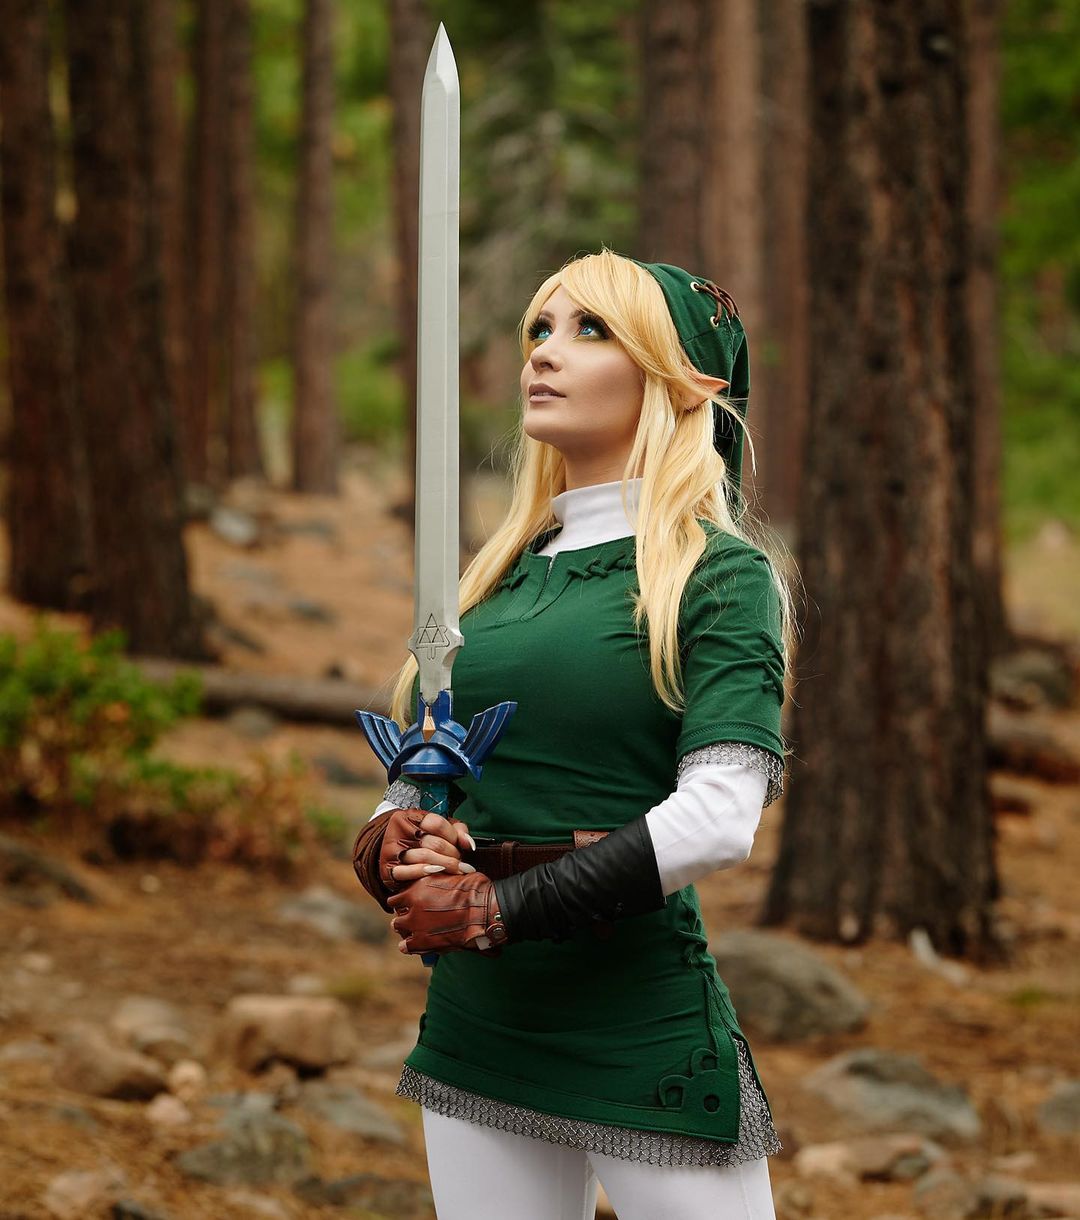 This Genderbent Link Cosplay Is Ready To Save Hyrule